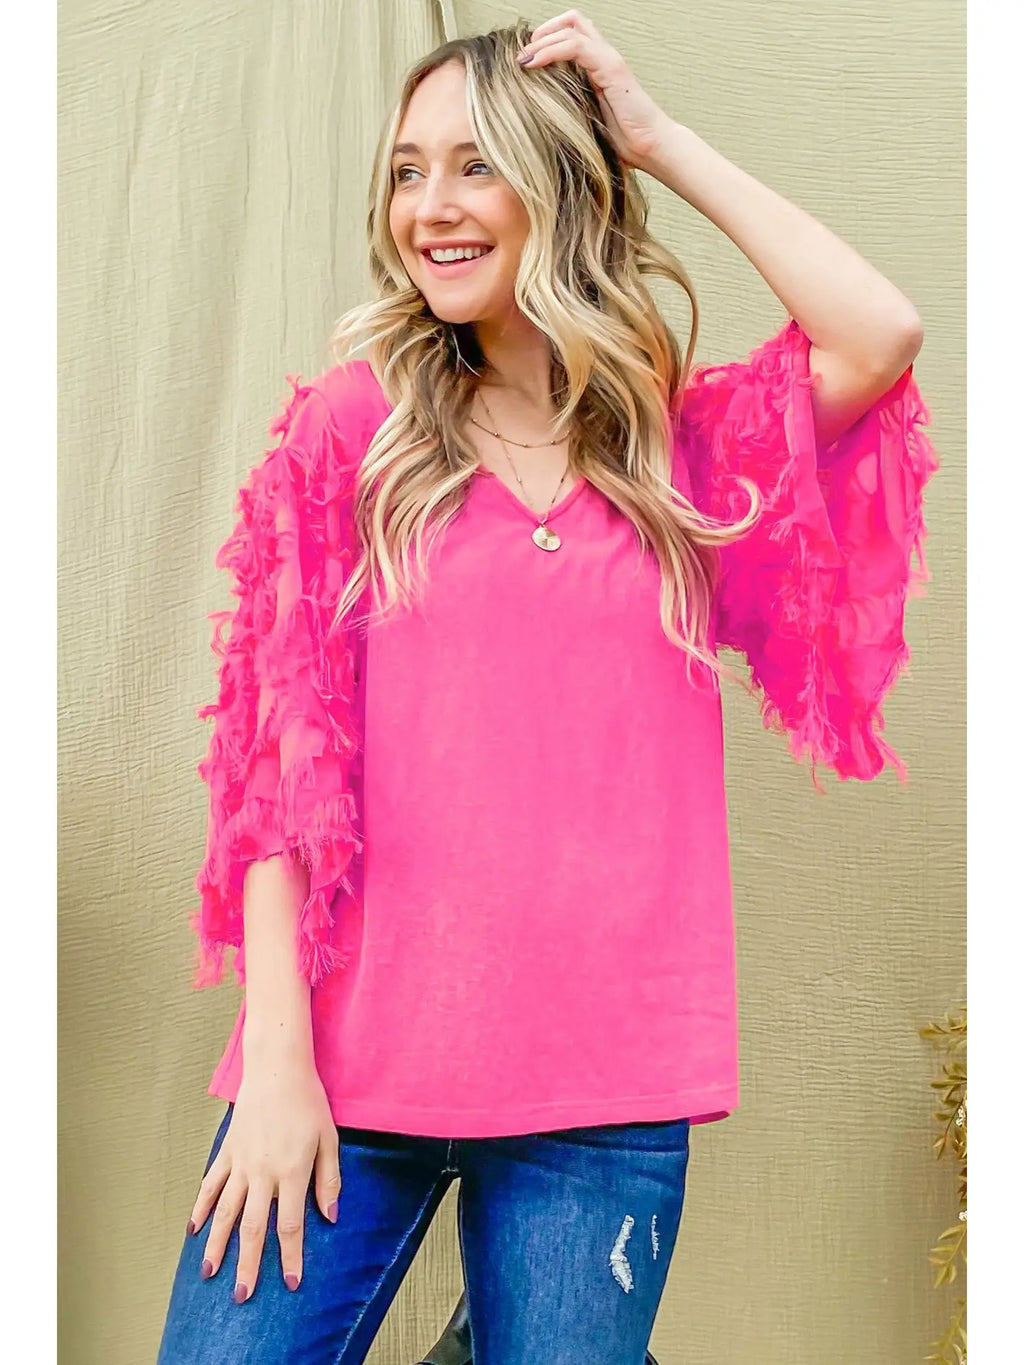 Hot pink, feathered sleeve shirt